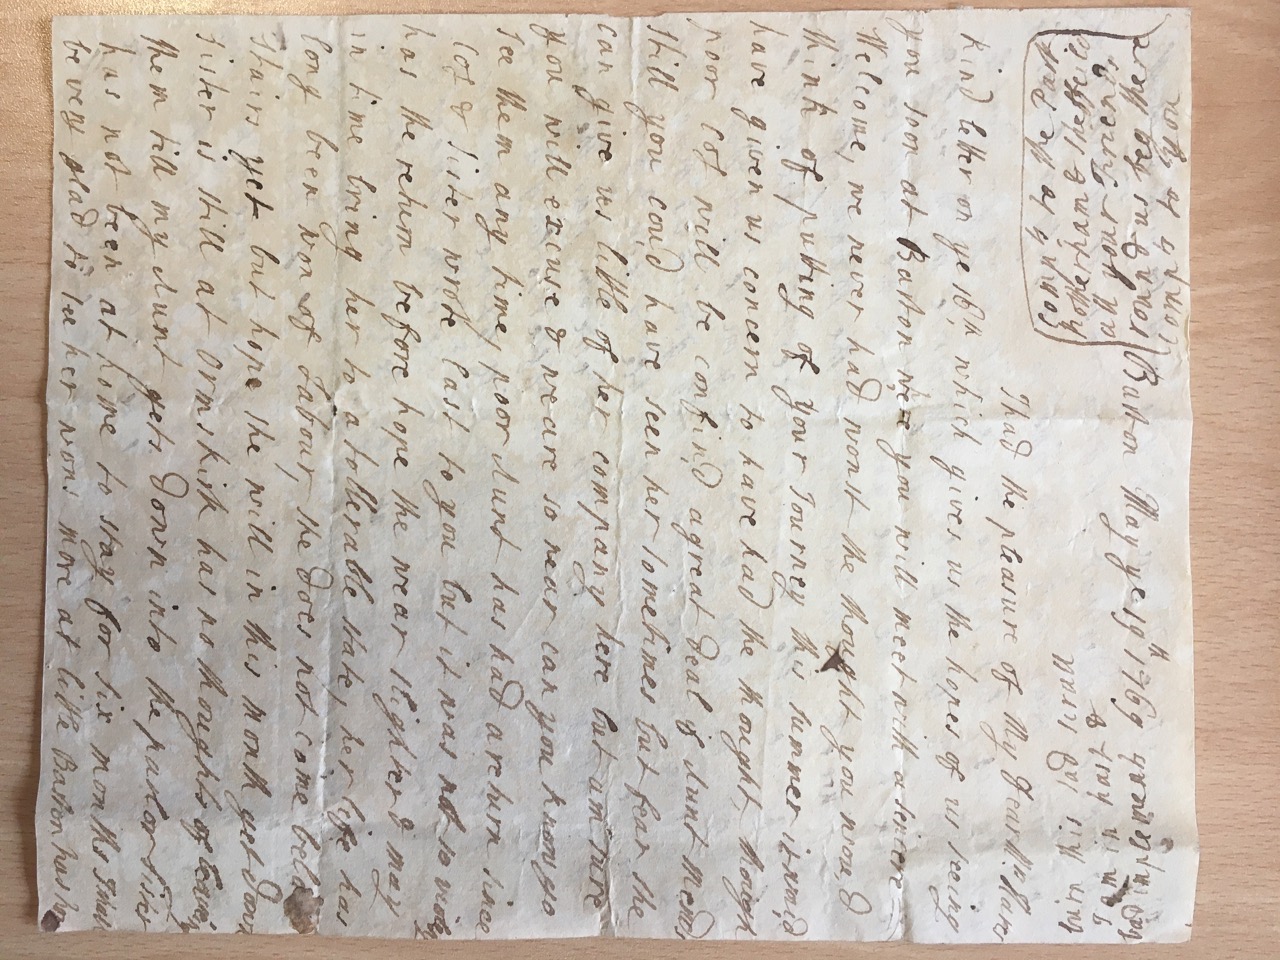 Image #1 of letter: Ellin Hesketh to Ann Hare, 19 May 1769